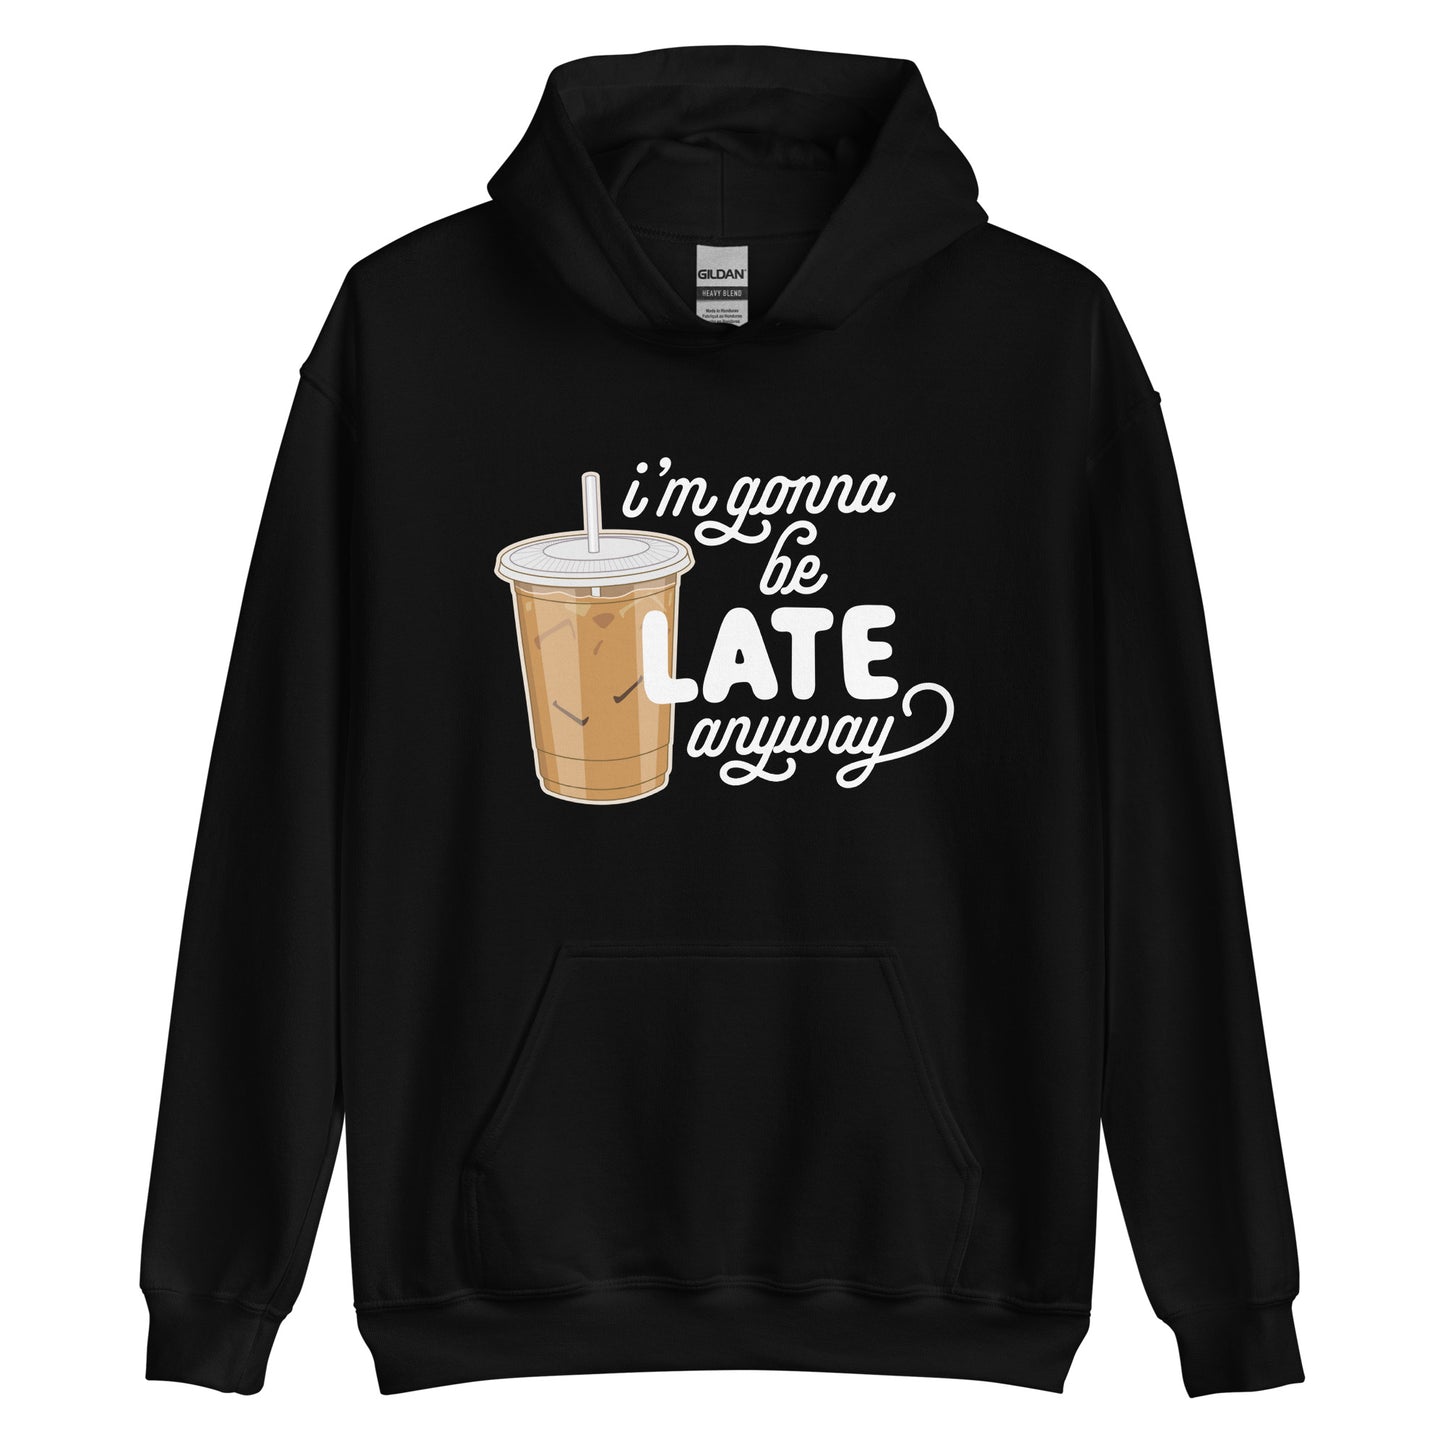 A black hooded sweatshirt featuring an illustration of iced coffee. Text next to the coffee reads "I'm gonna be LATE anyway".